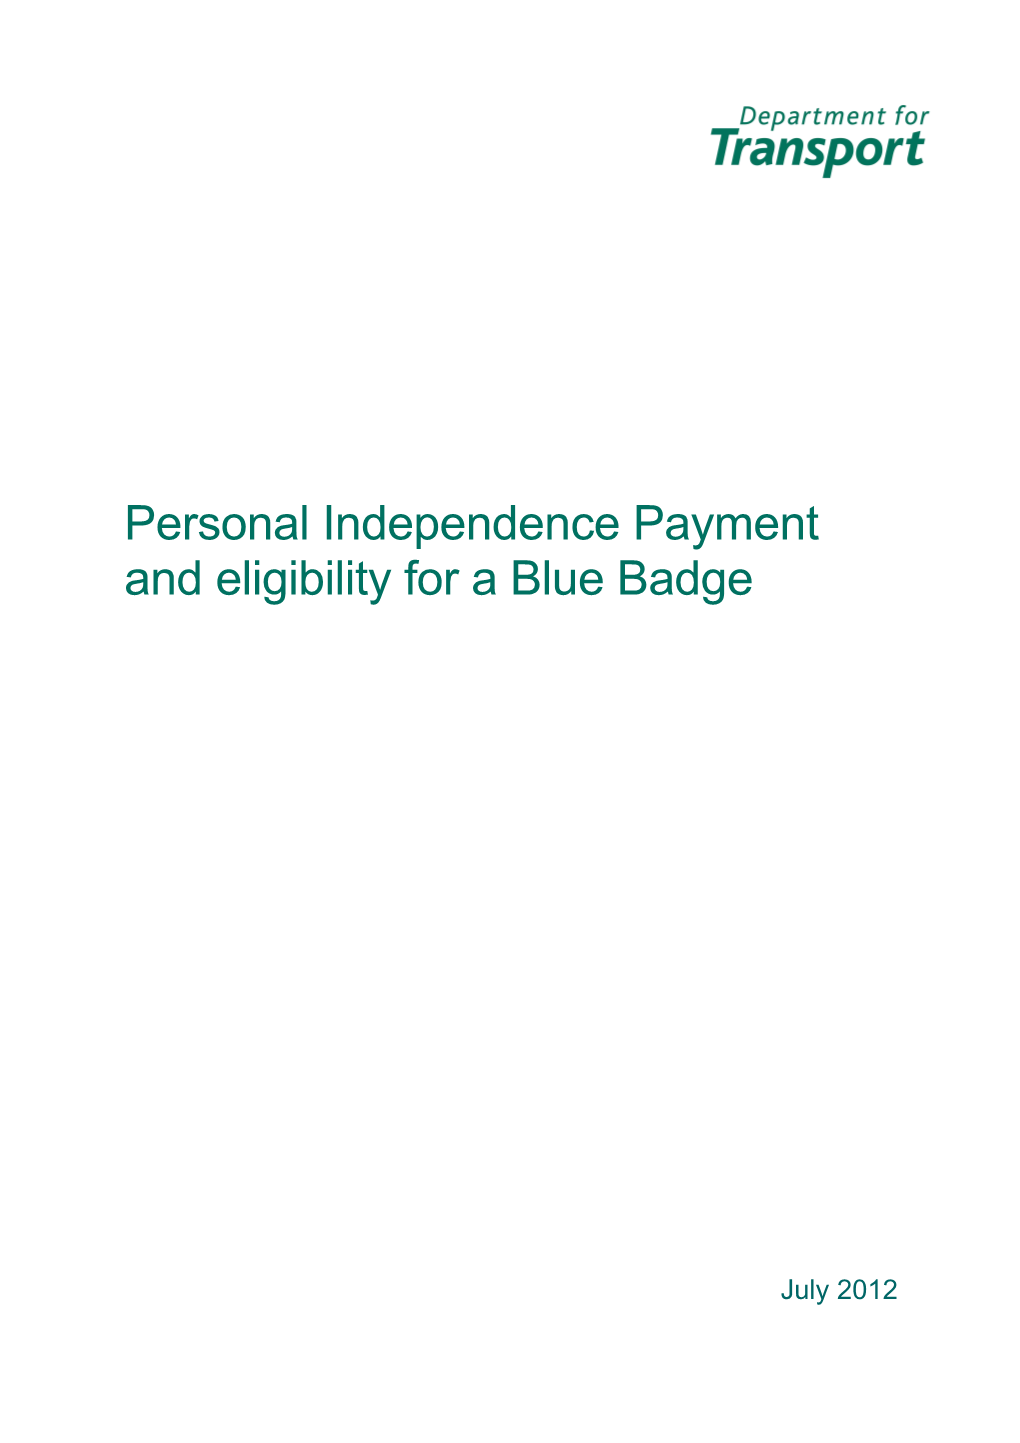 Personal Independence Payment and Eligibility for a Blue Badge